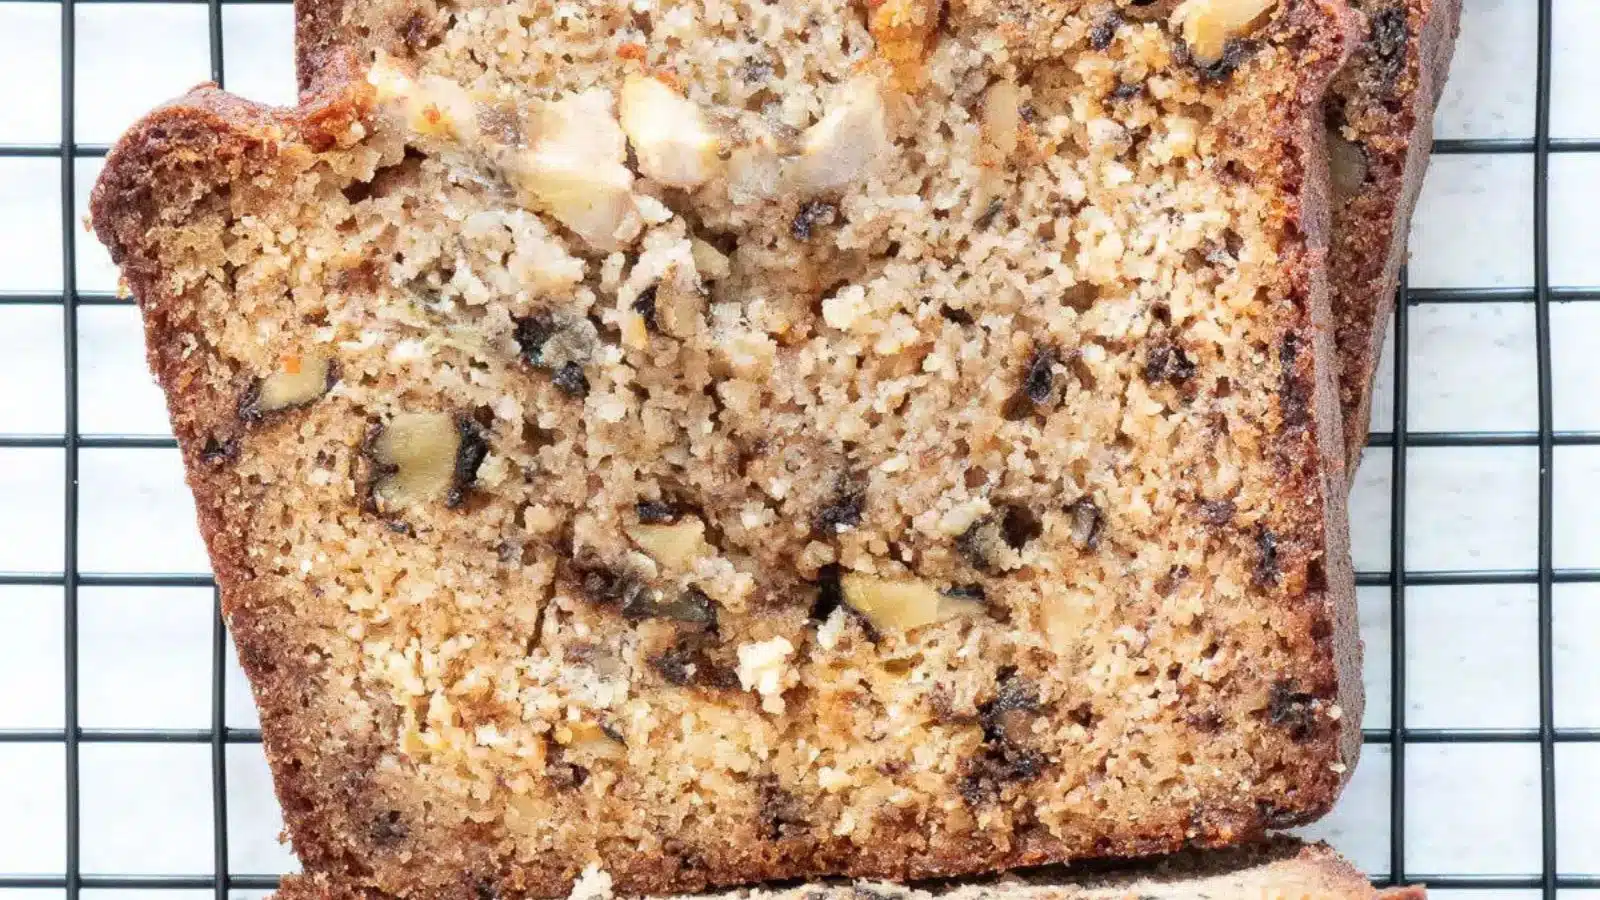 overhead view of a slice of banana bread with walnuts